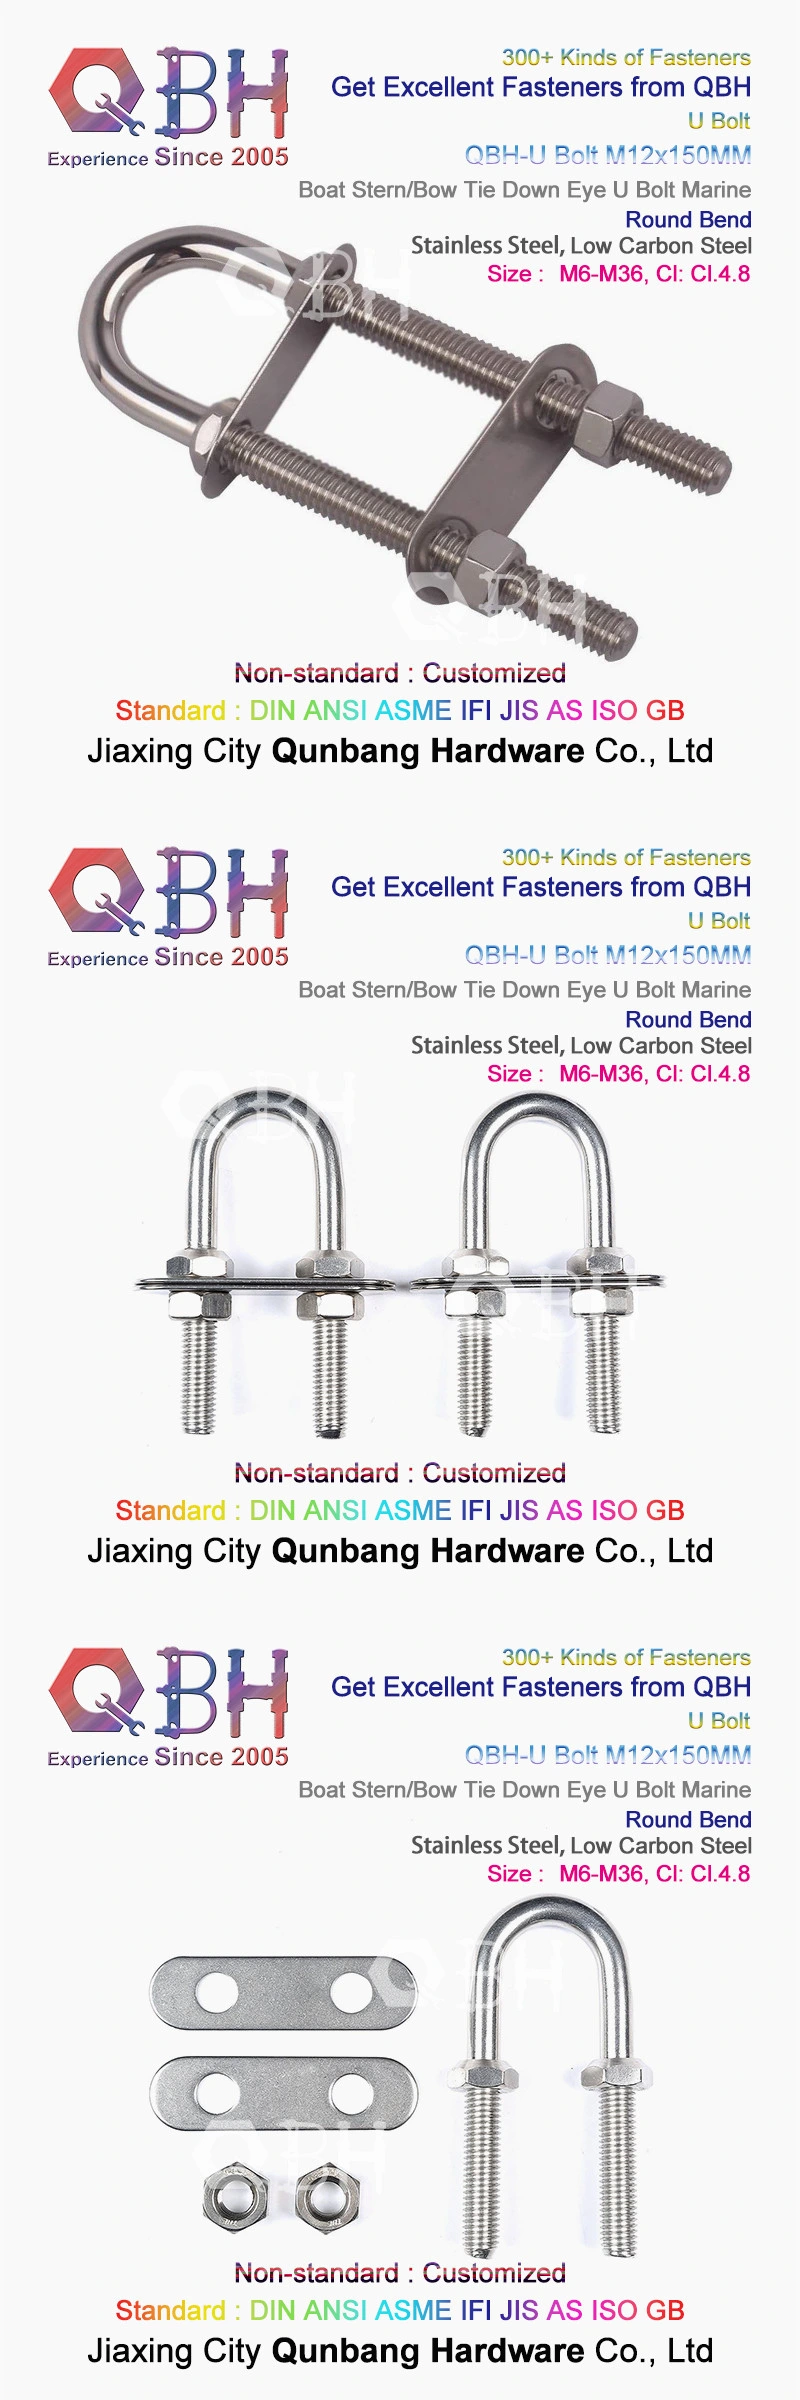 Qbh 300+ Shipyard Ship Tunnage Building Construction Structure Solar Panel Round Square Bend Pipe Fitting Spring Stainless Carbon Steel Zinc Plated U Stud Bolt